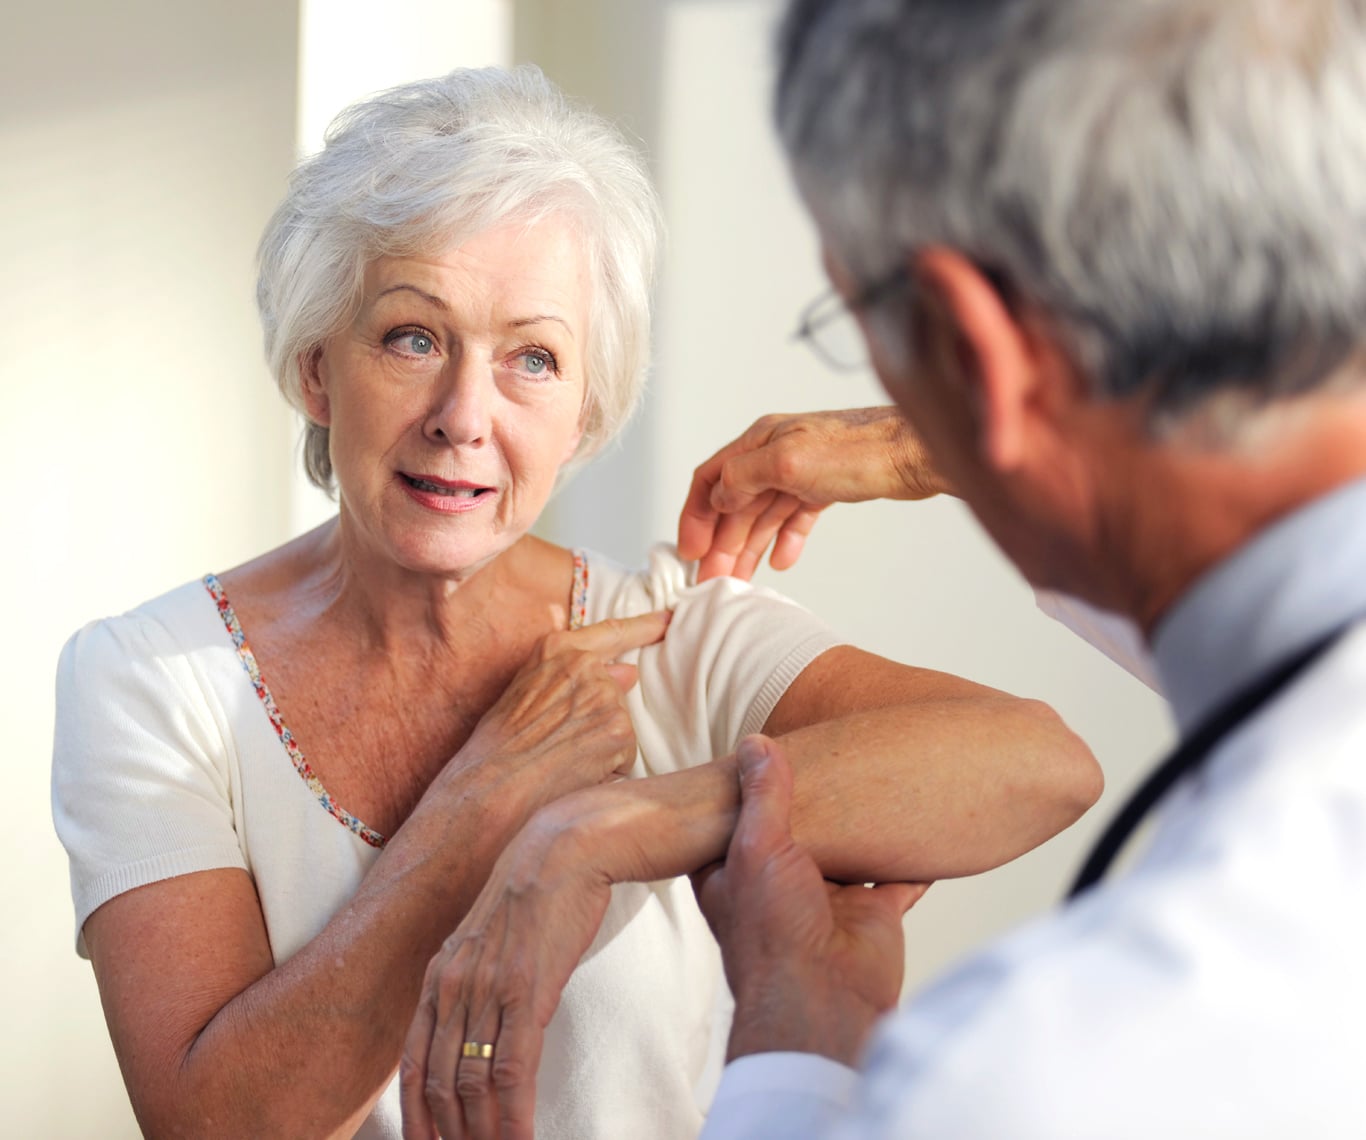 Shingles Vaccine for Adults Over 60